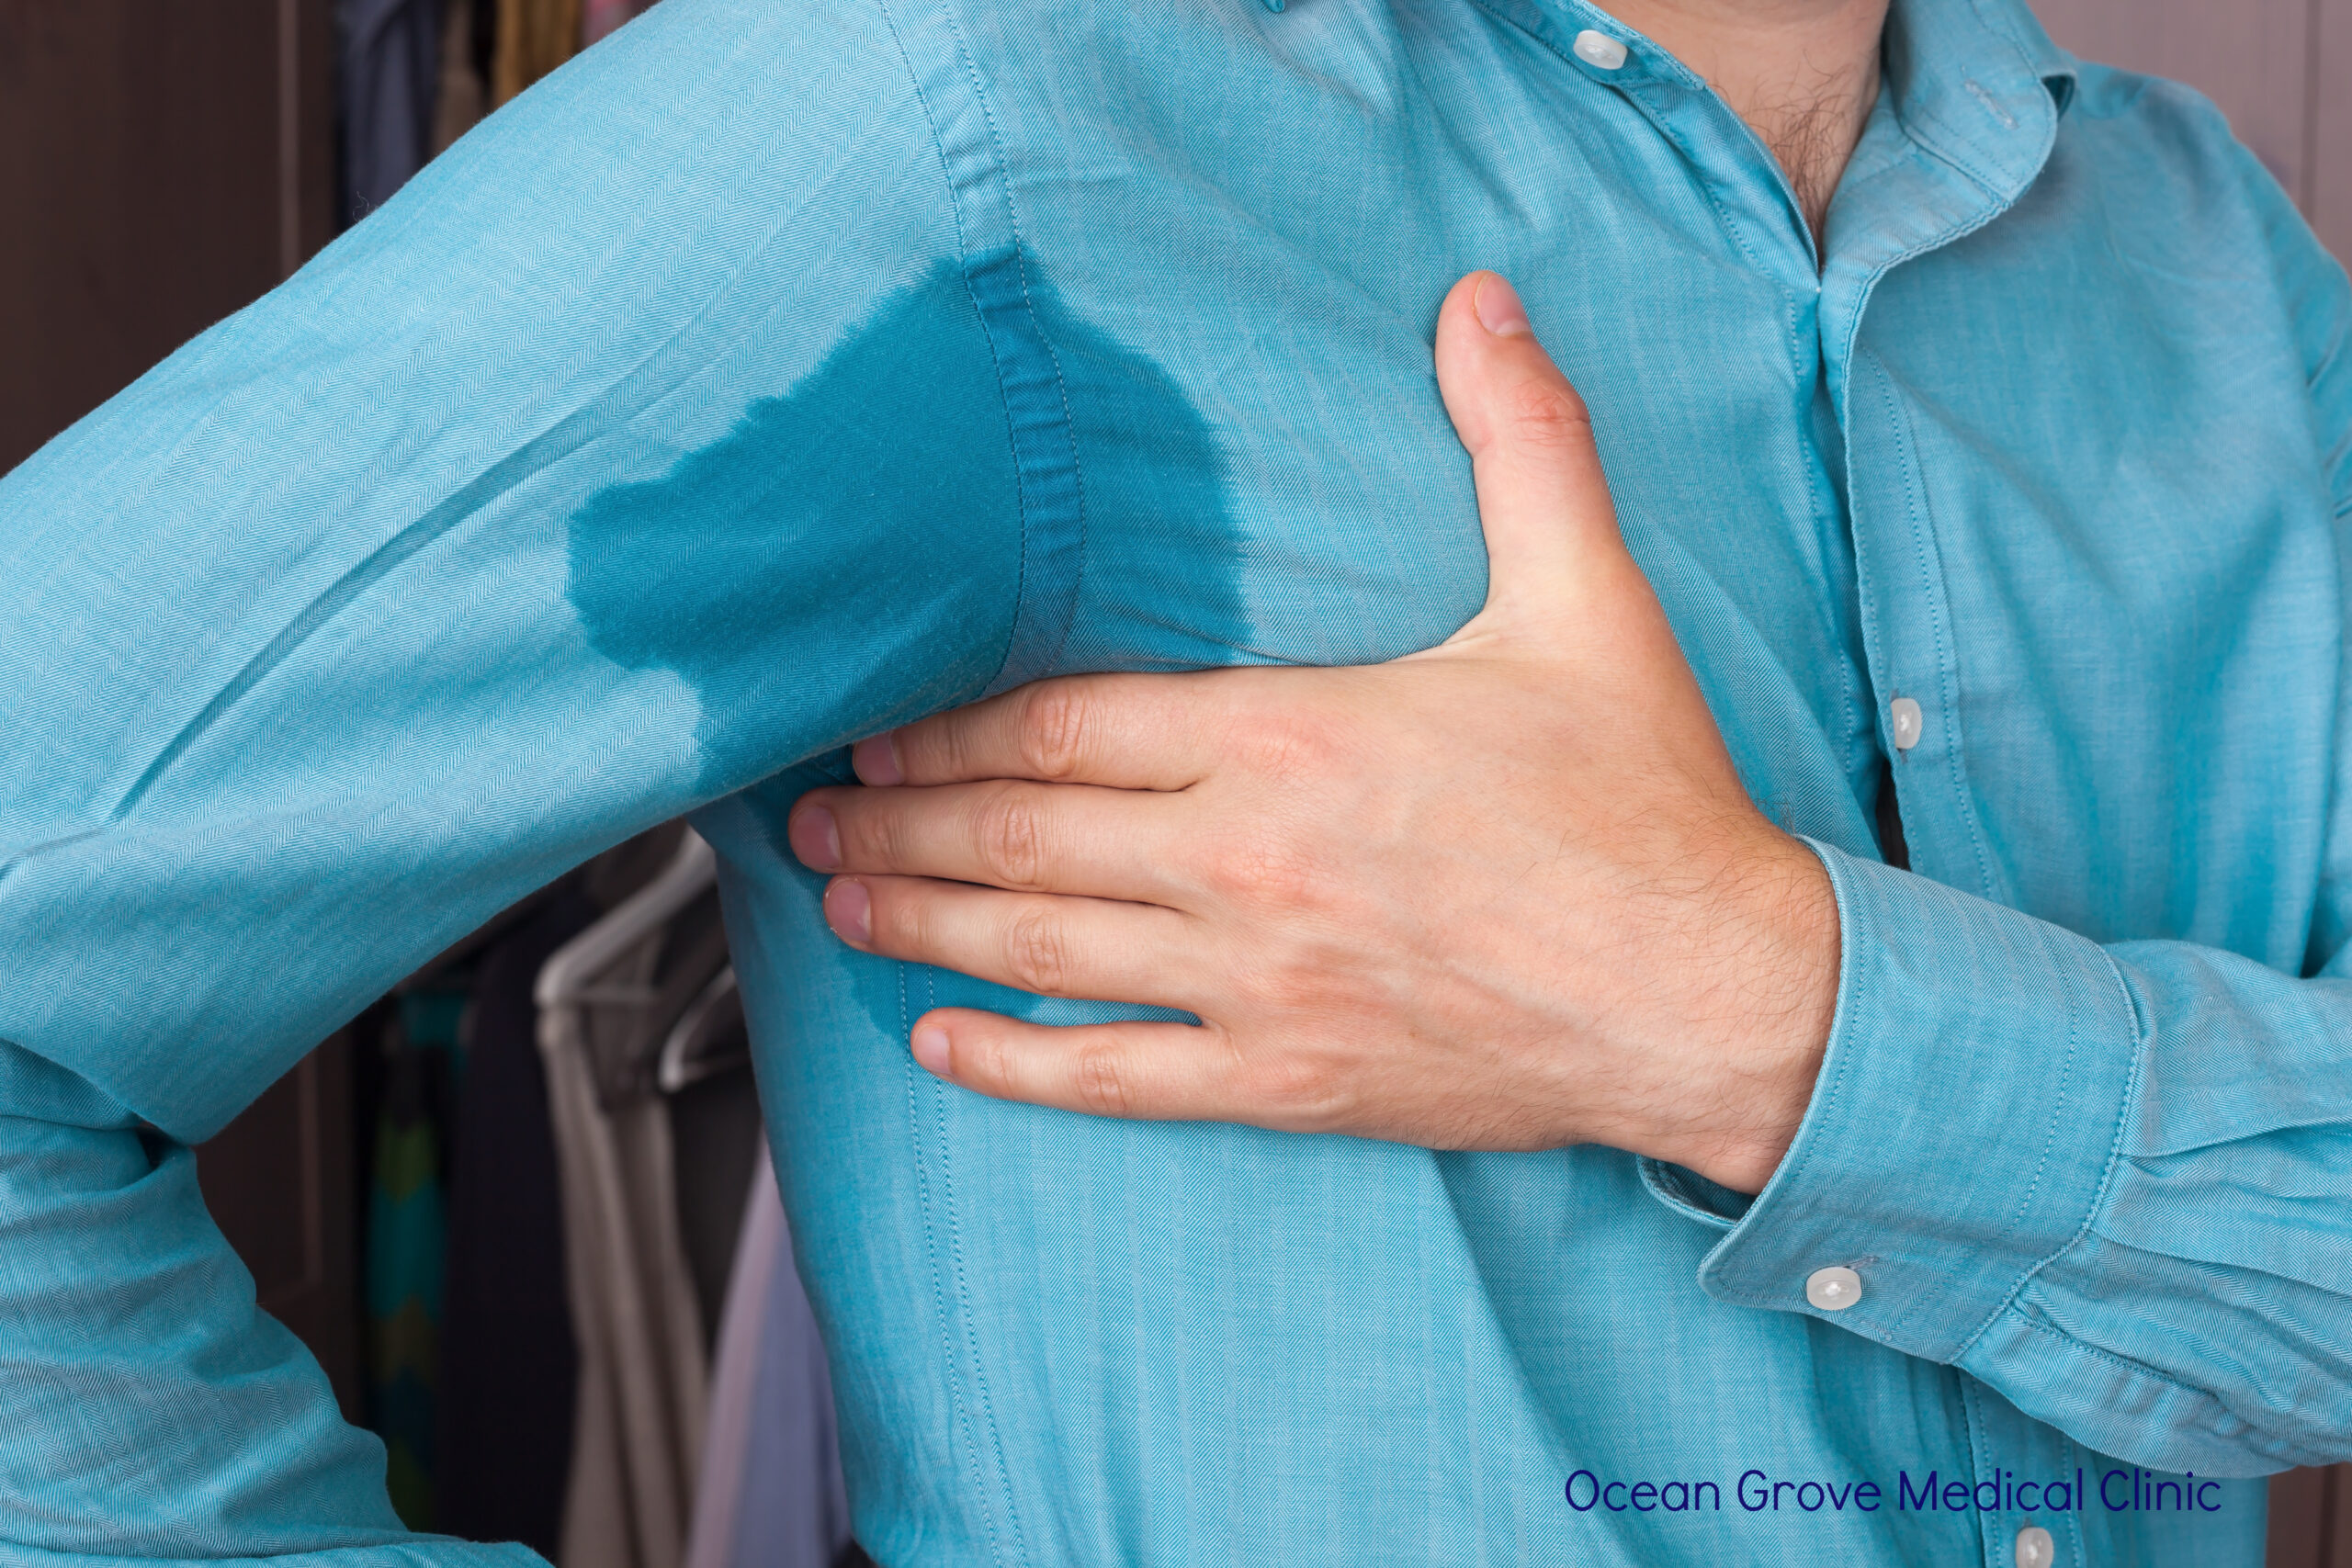 Excessive Sweat Production (Hyperhidrosis) - Ocean Grove Medical Clinic